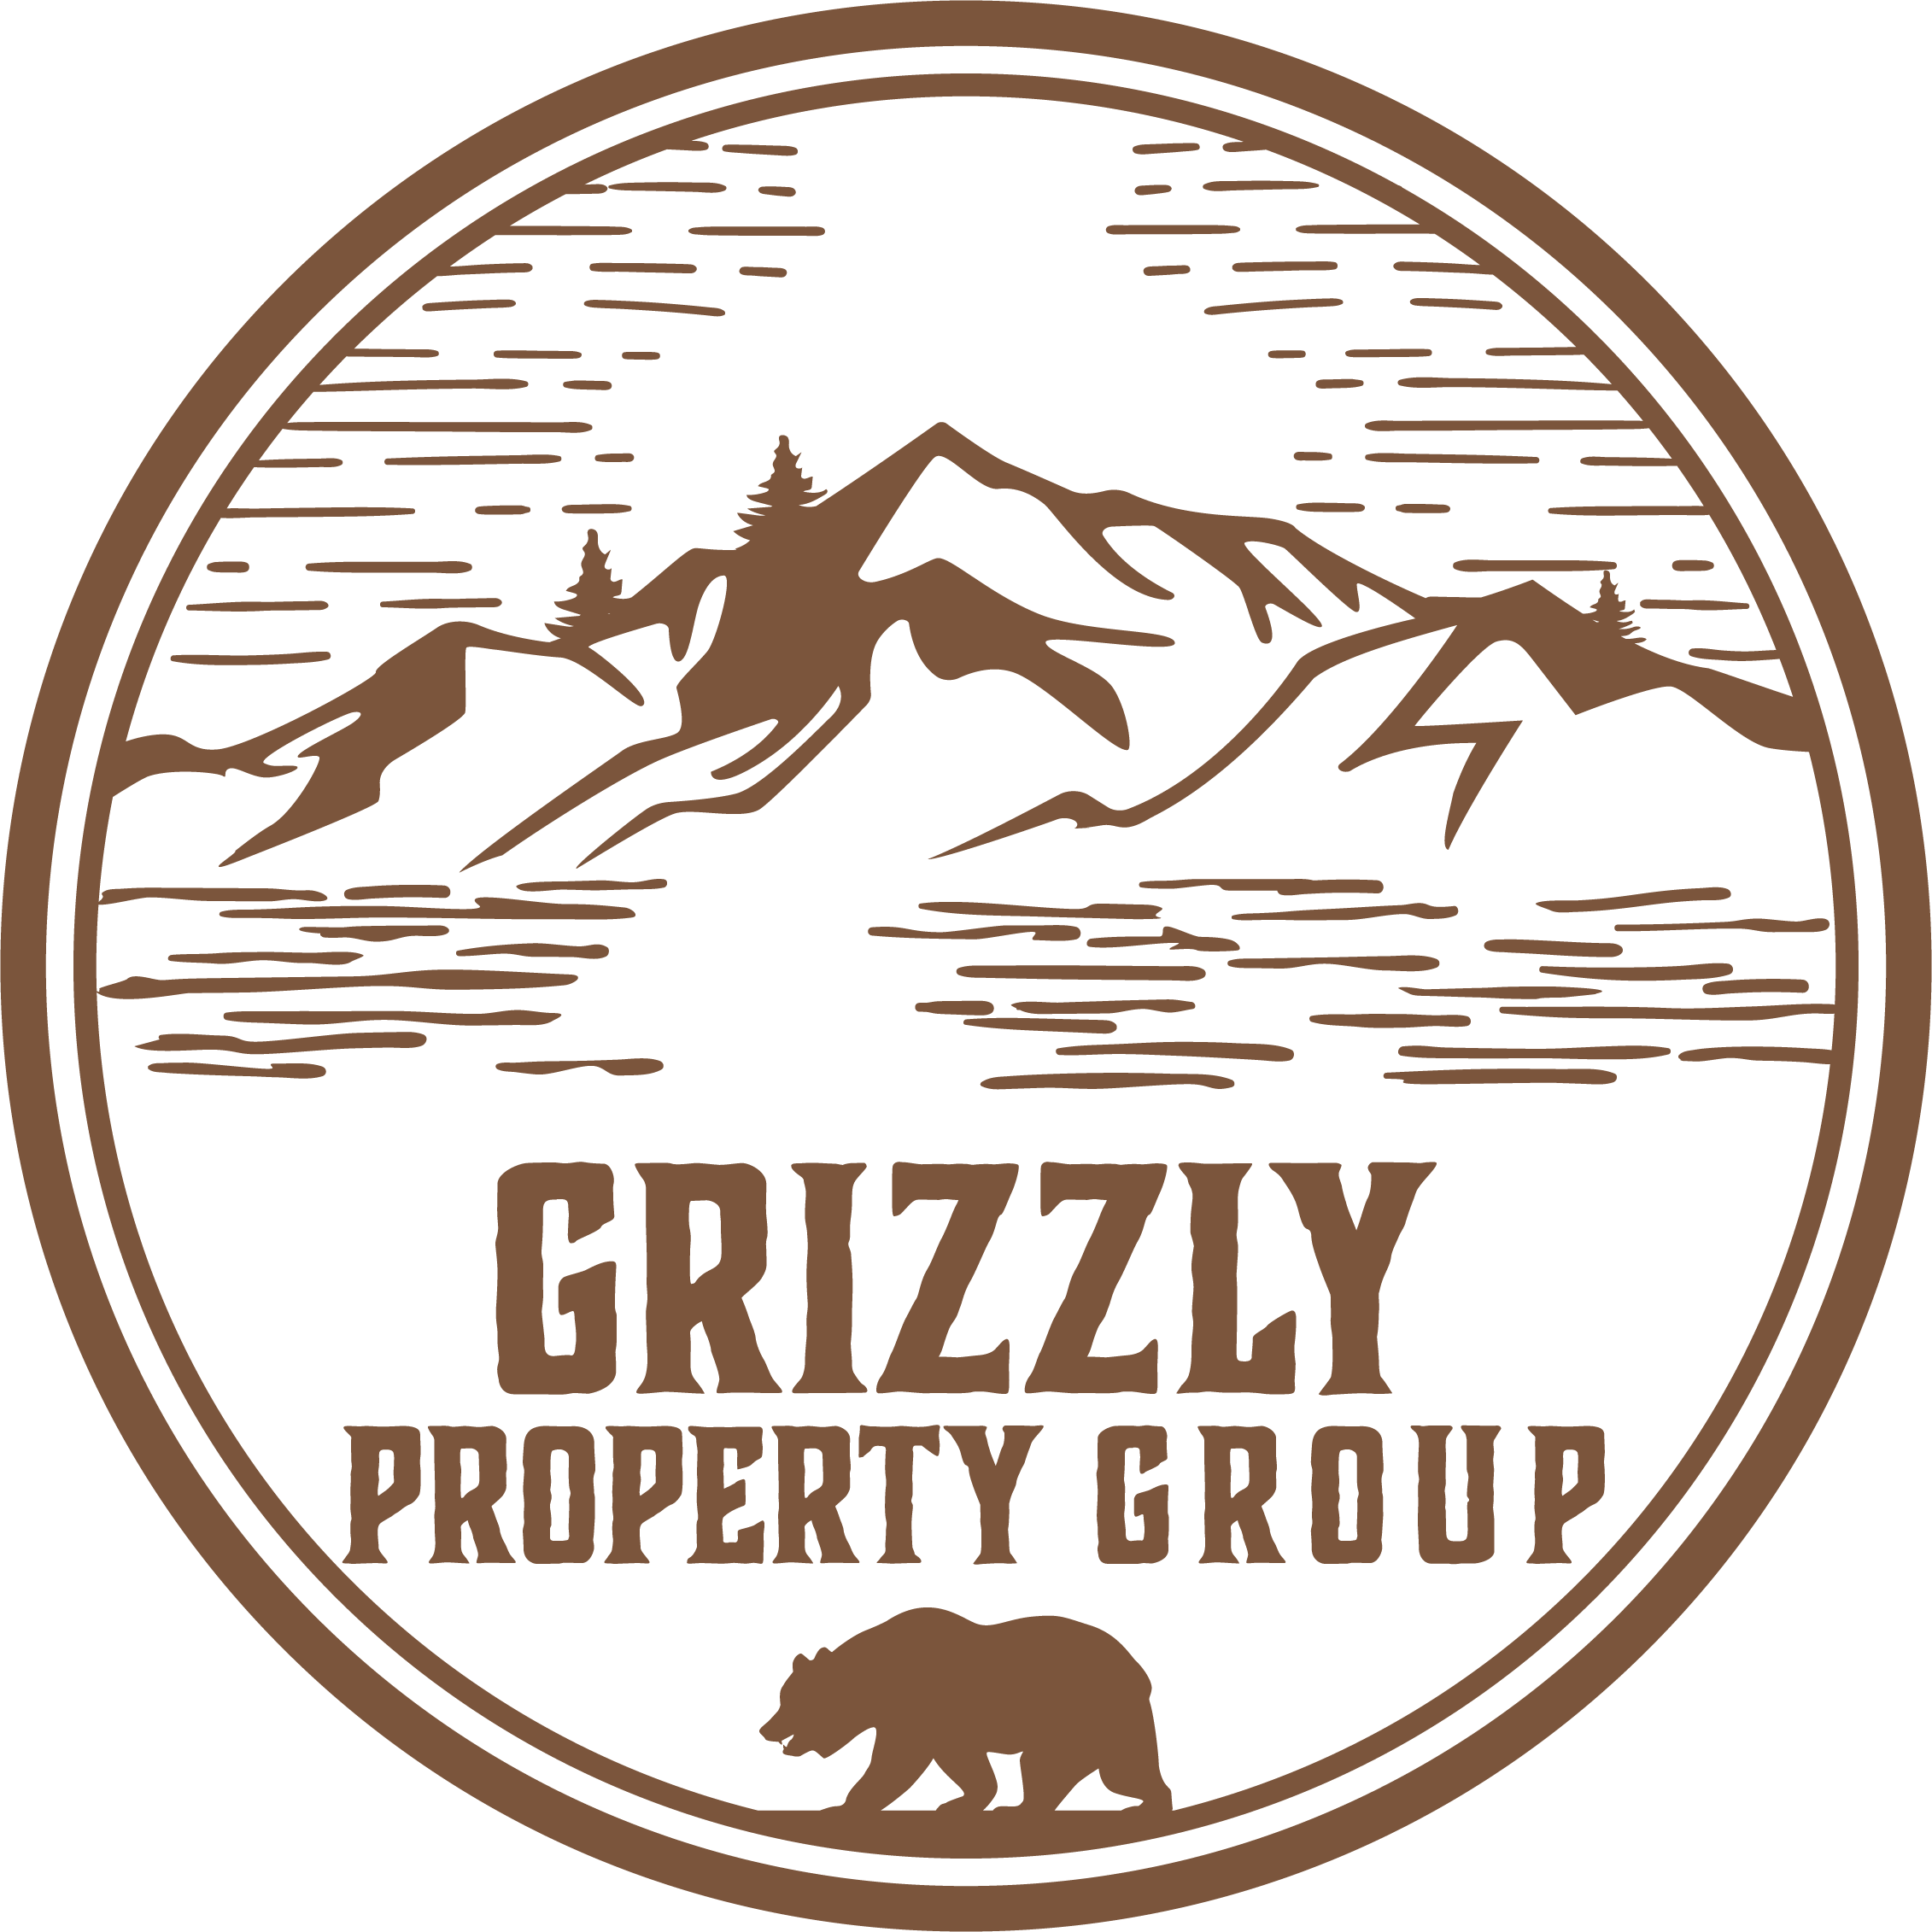 Grizzly Property Group